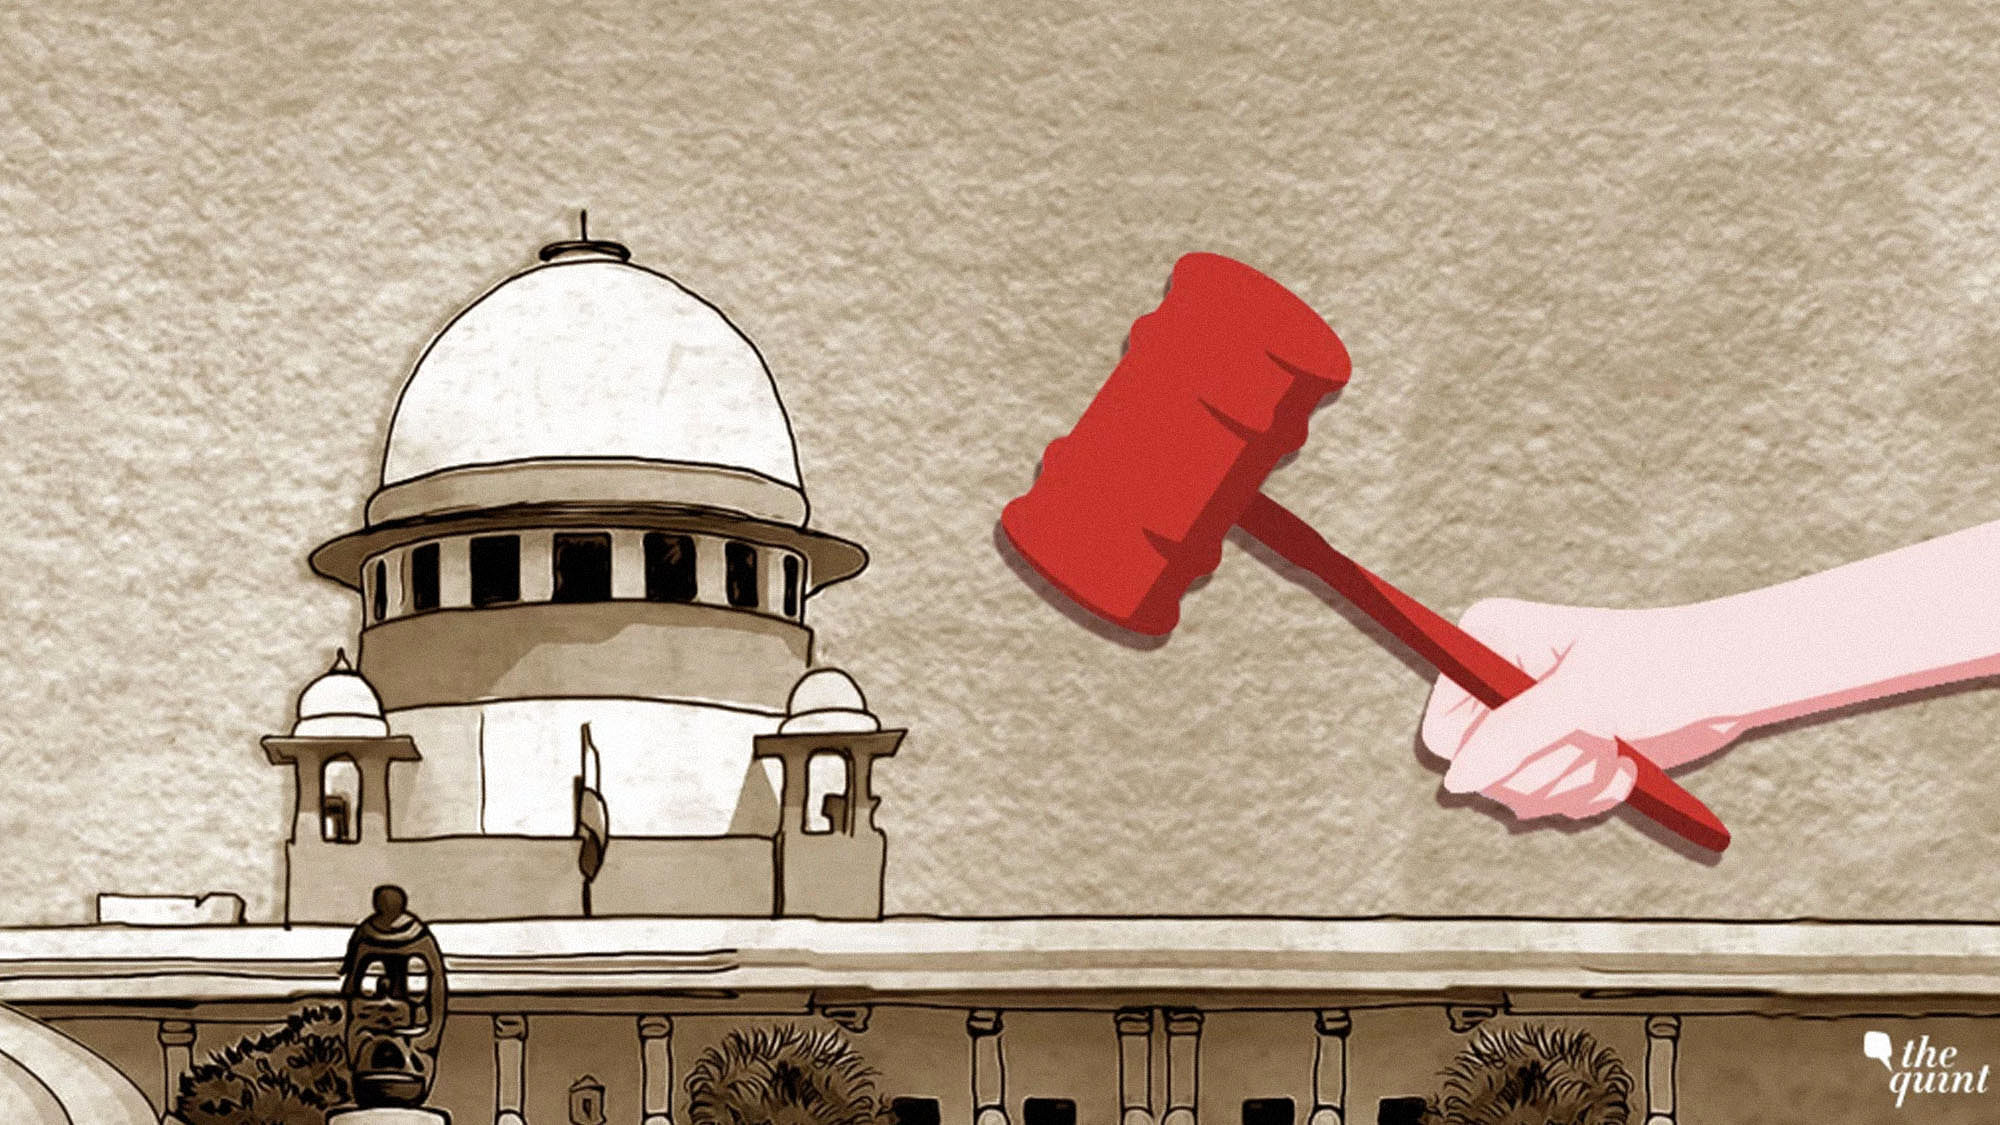 This means that the Delhi HC’s orders cannot be cited by any other persons accused of offences under the UAPA. Image used for representational purposes.